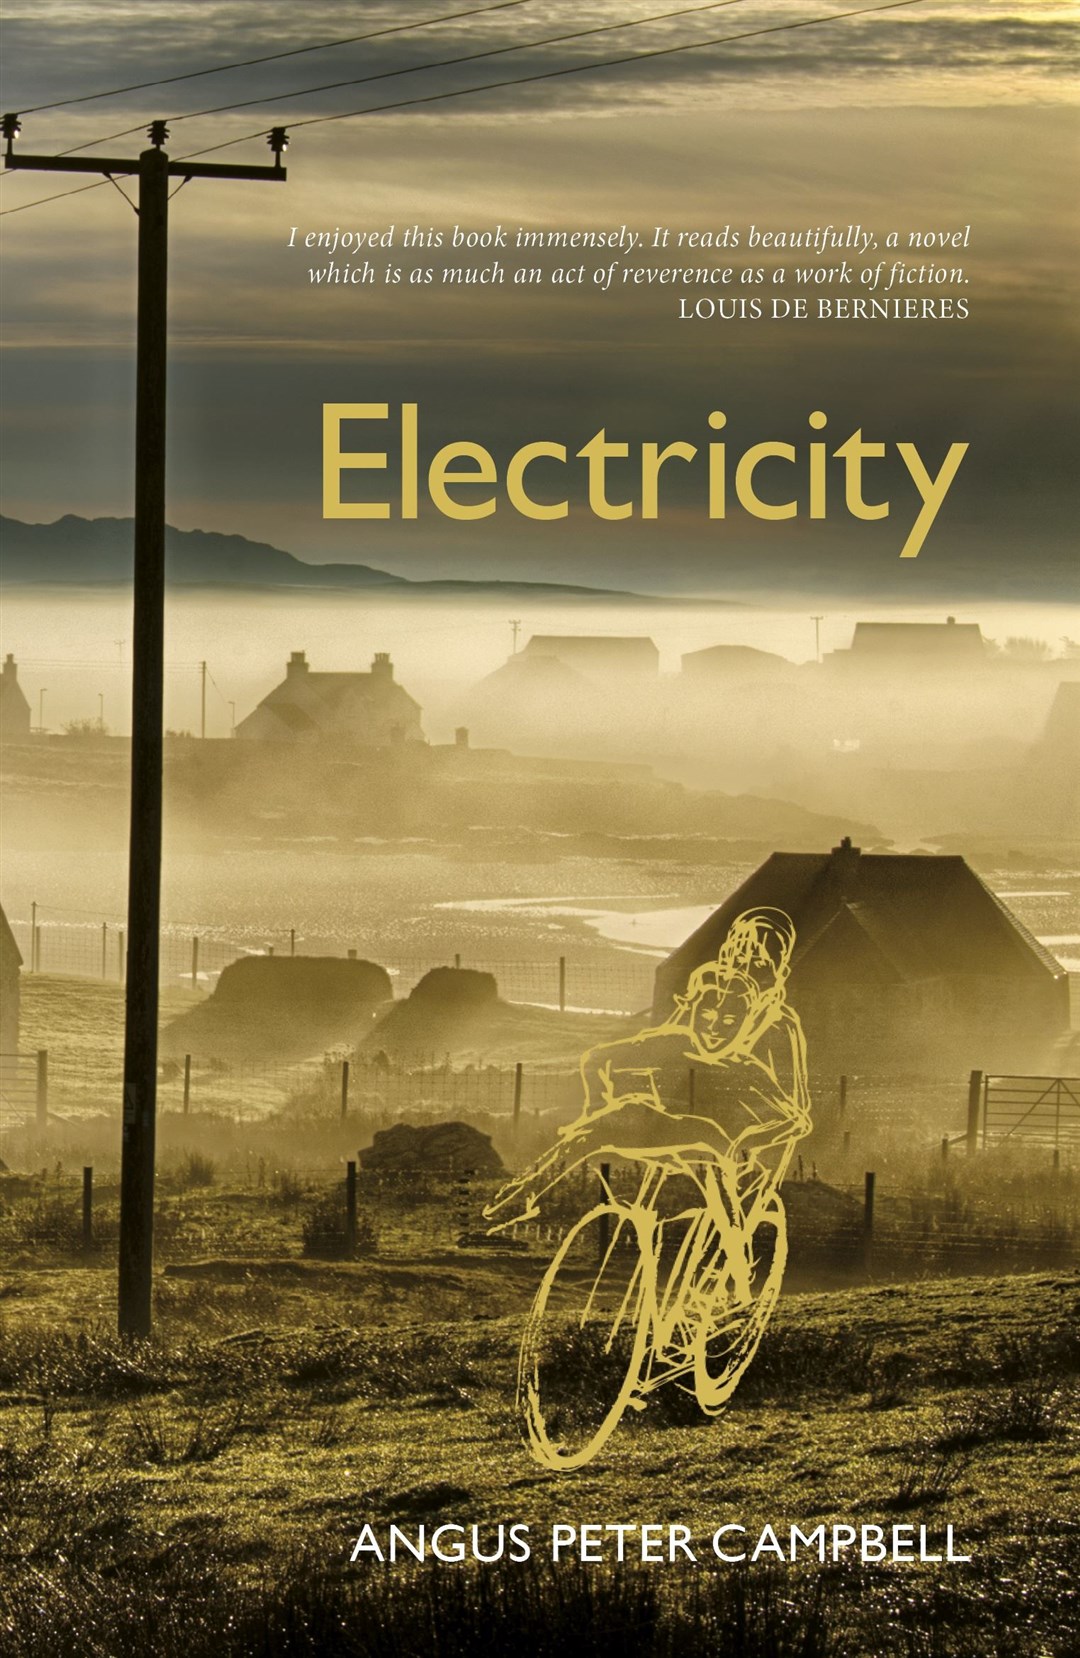 Electricity, the new novel from Angus Peter Campbell.